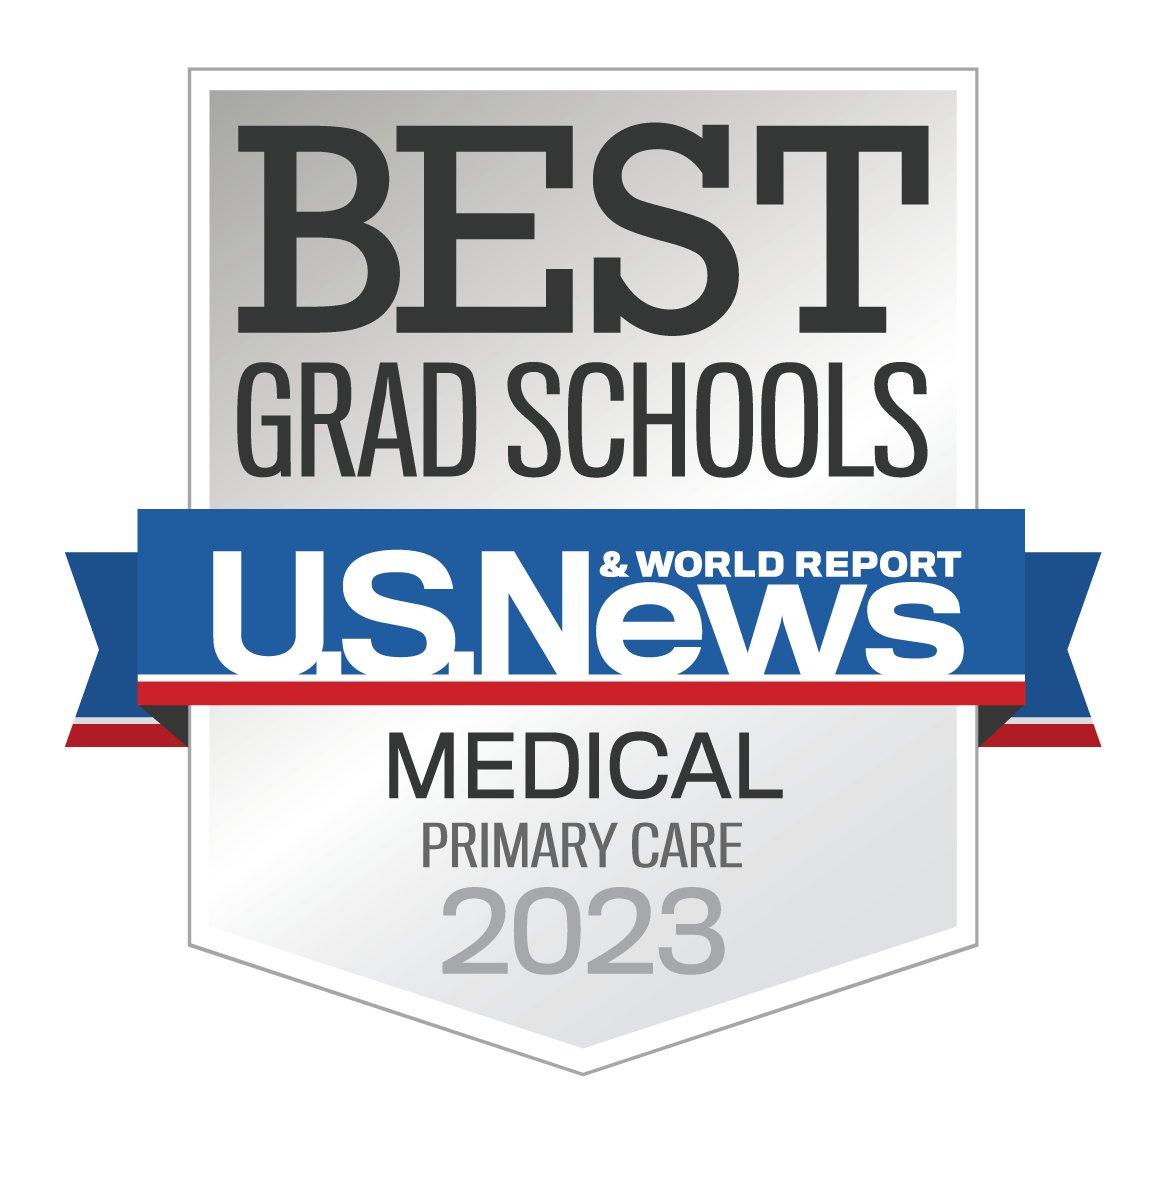 Best Grad Schools | Medical Primary Care 2023 | US News and World Report